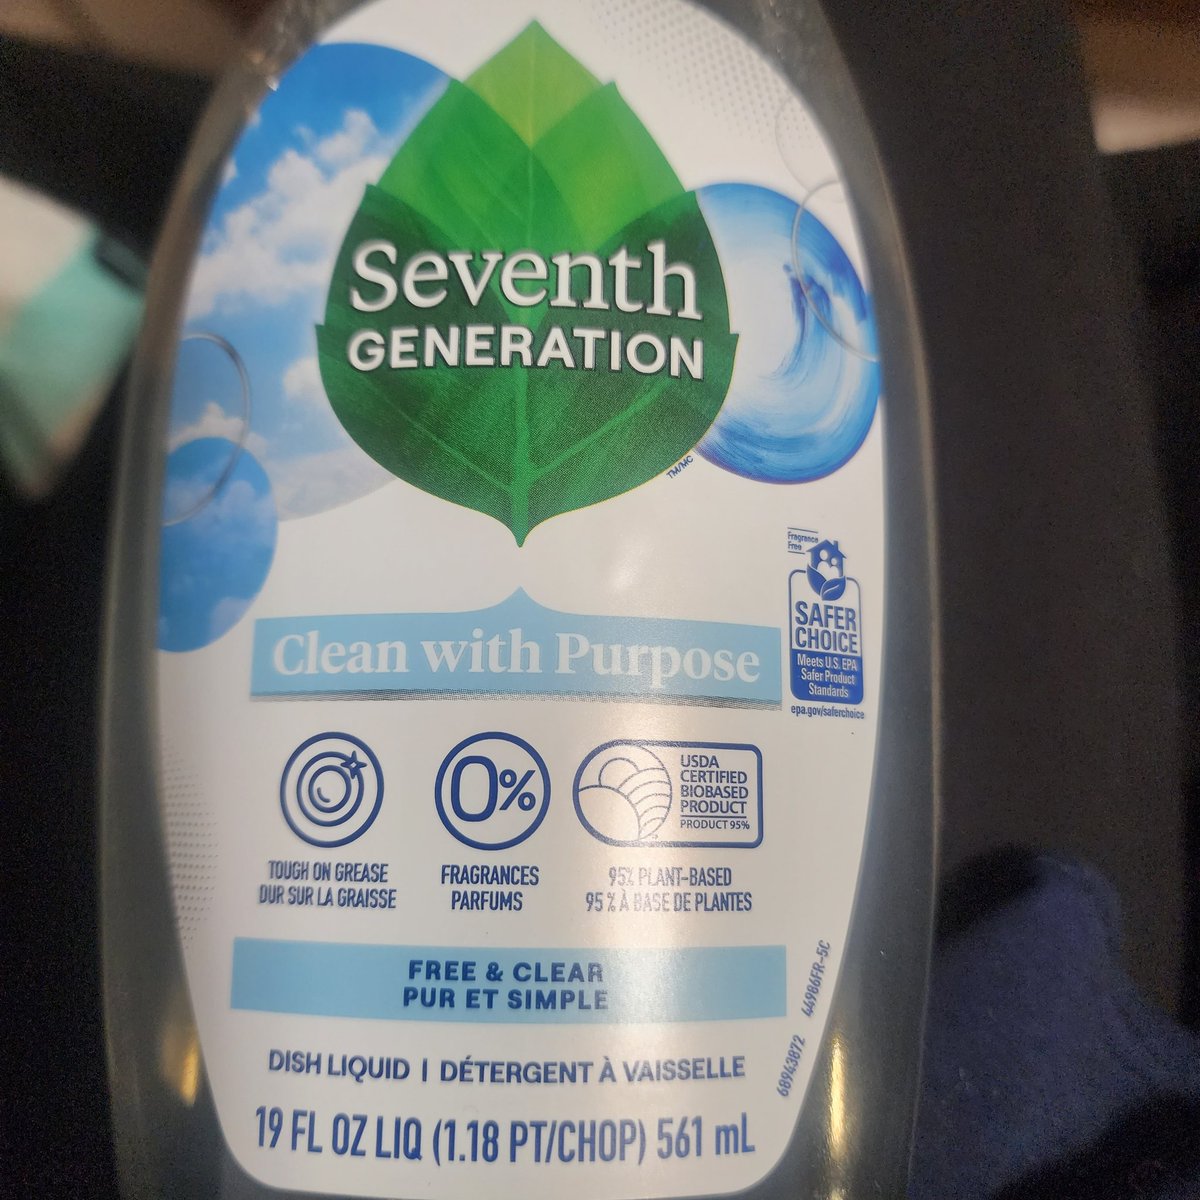 Anyone else (especially those with #MCAS) react to the fragrance free 7th generation hand soap? My hands are red & blotchy & like they're on fire. They've been red and blotchy while doing dishes before but Raynaud's and temperature changes from hot water does it but burning??